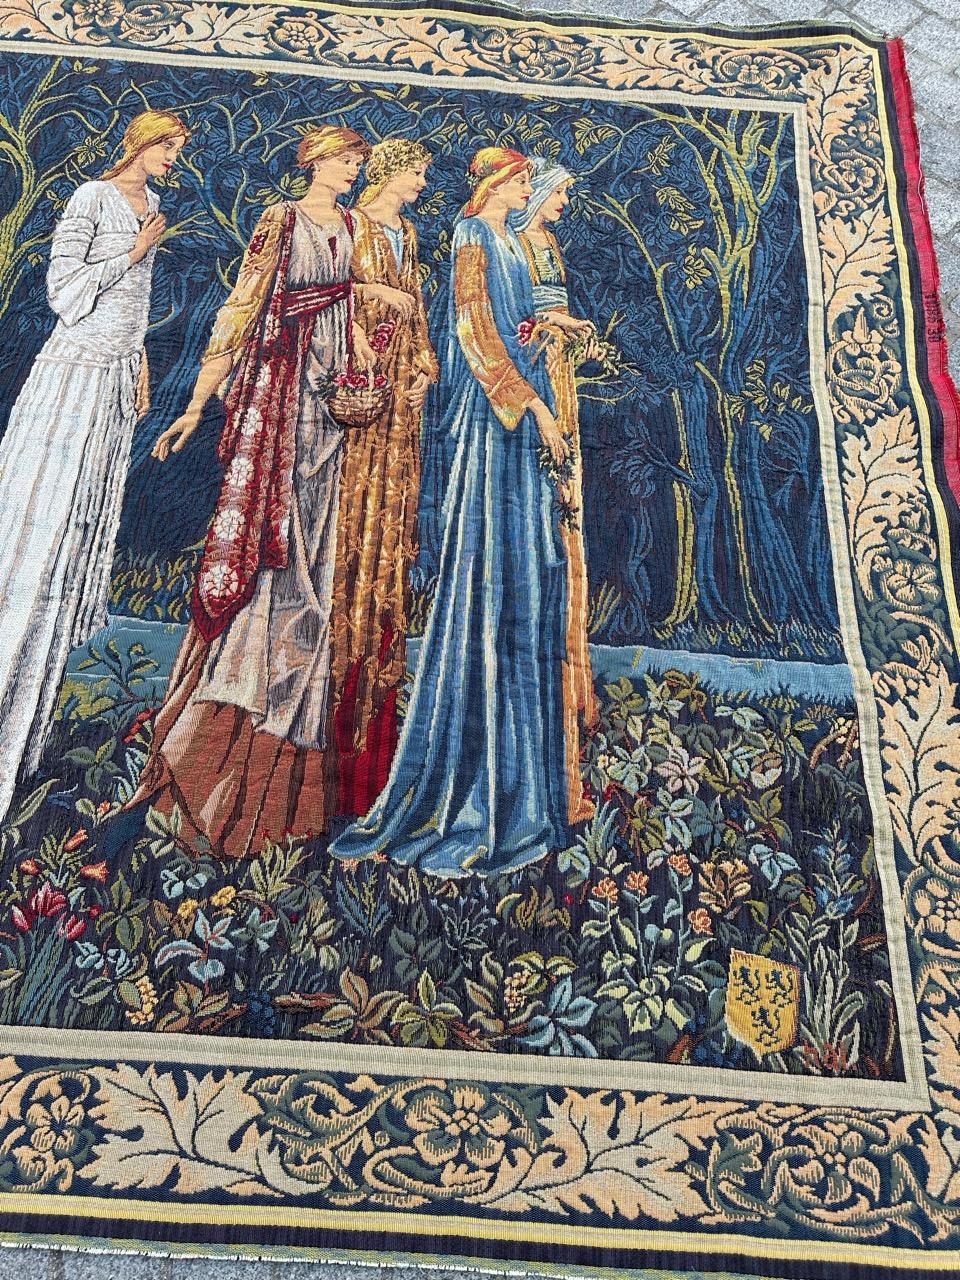 Introducing a masterpiece of artistry and history, a truly exceptional vintage French Aubusson-style tapestry that will transport you to a world of enchantment. This tapestry is a celebration of love, myth, and meticulous craftsmanship.

This